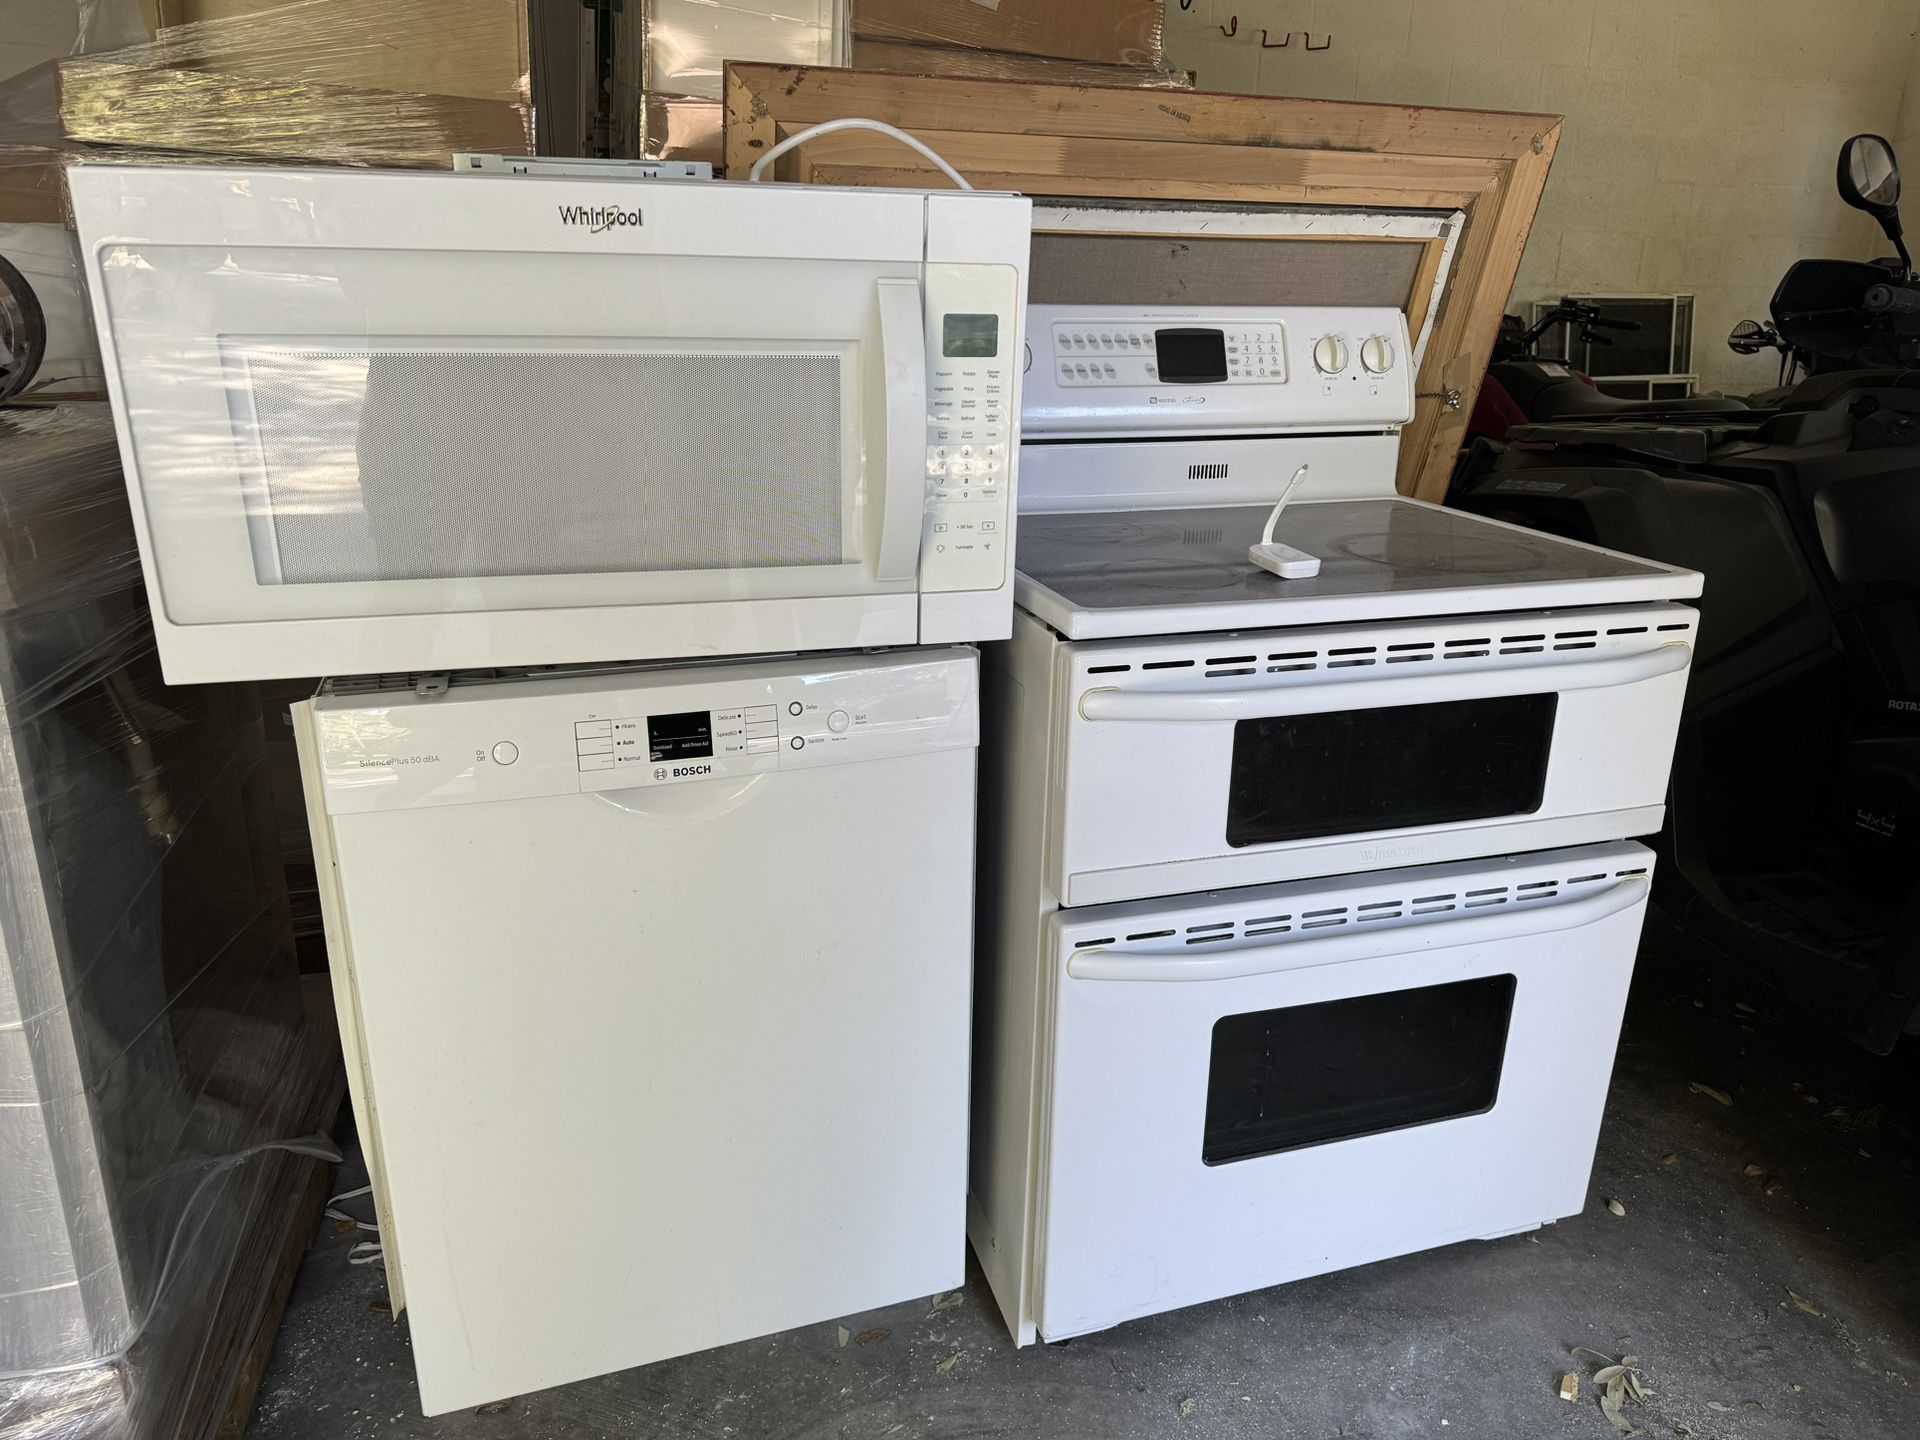 Dishwasher, Stove And Microwave, Good Working Cond.